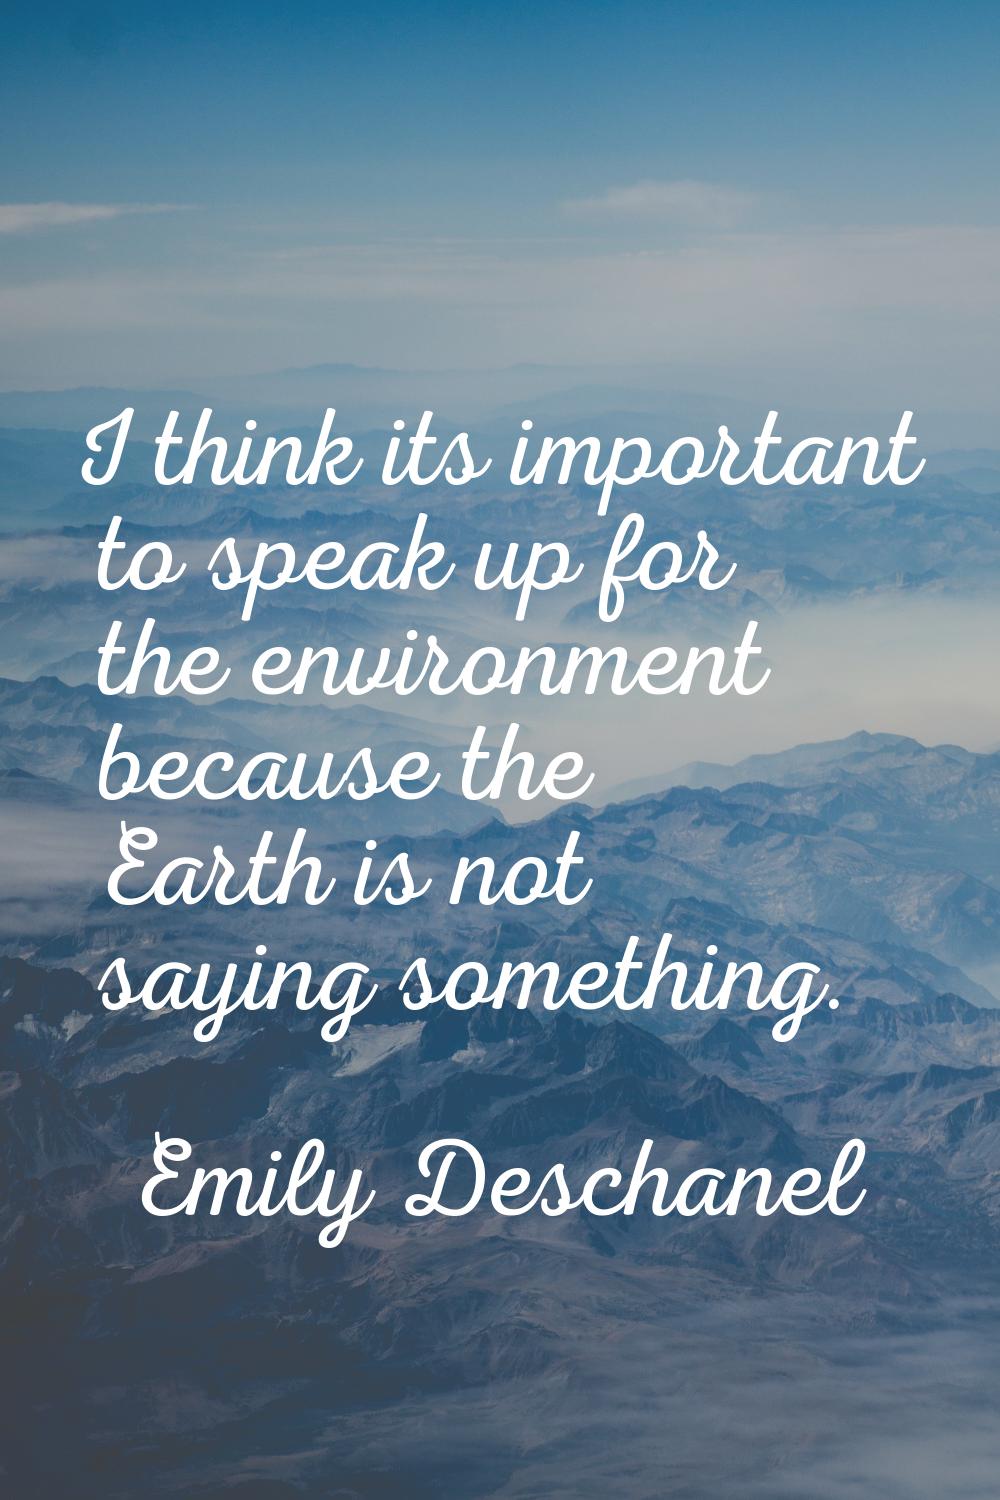 I think its important to speak up for the environment because the Earth is not saying something.